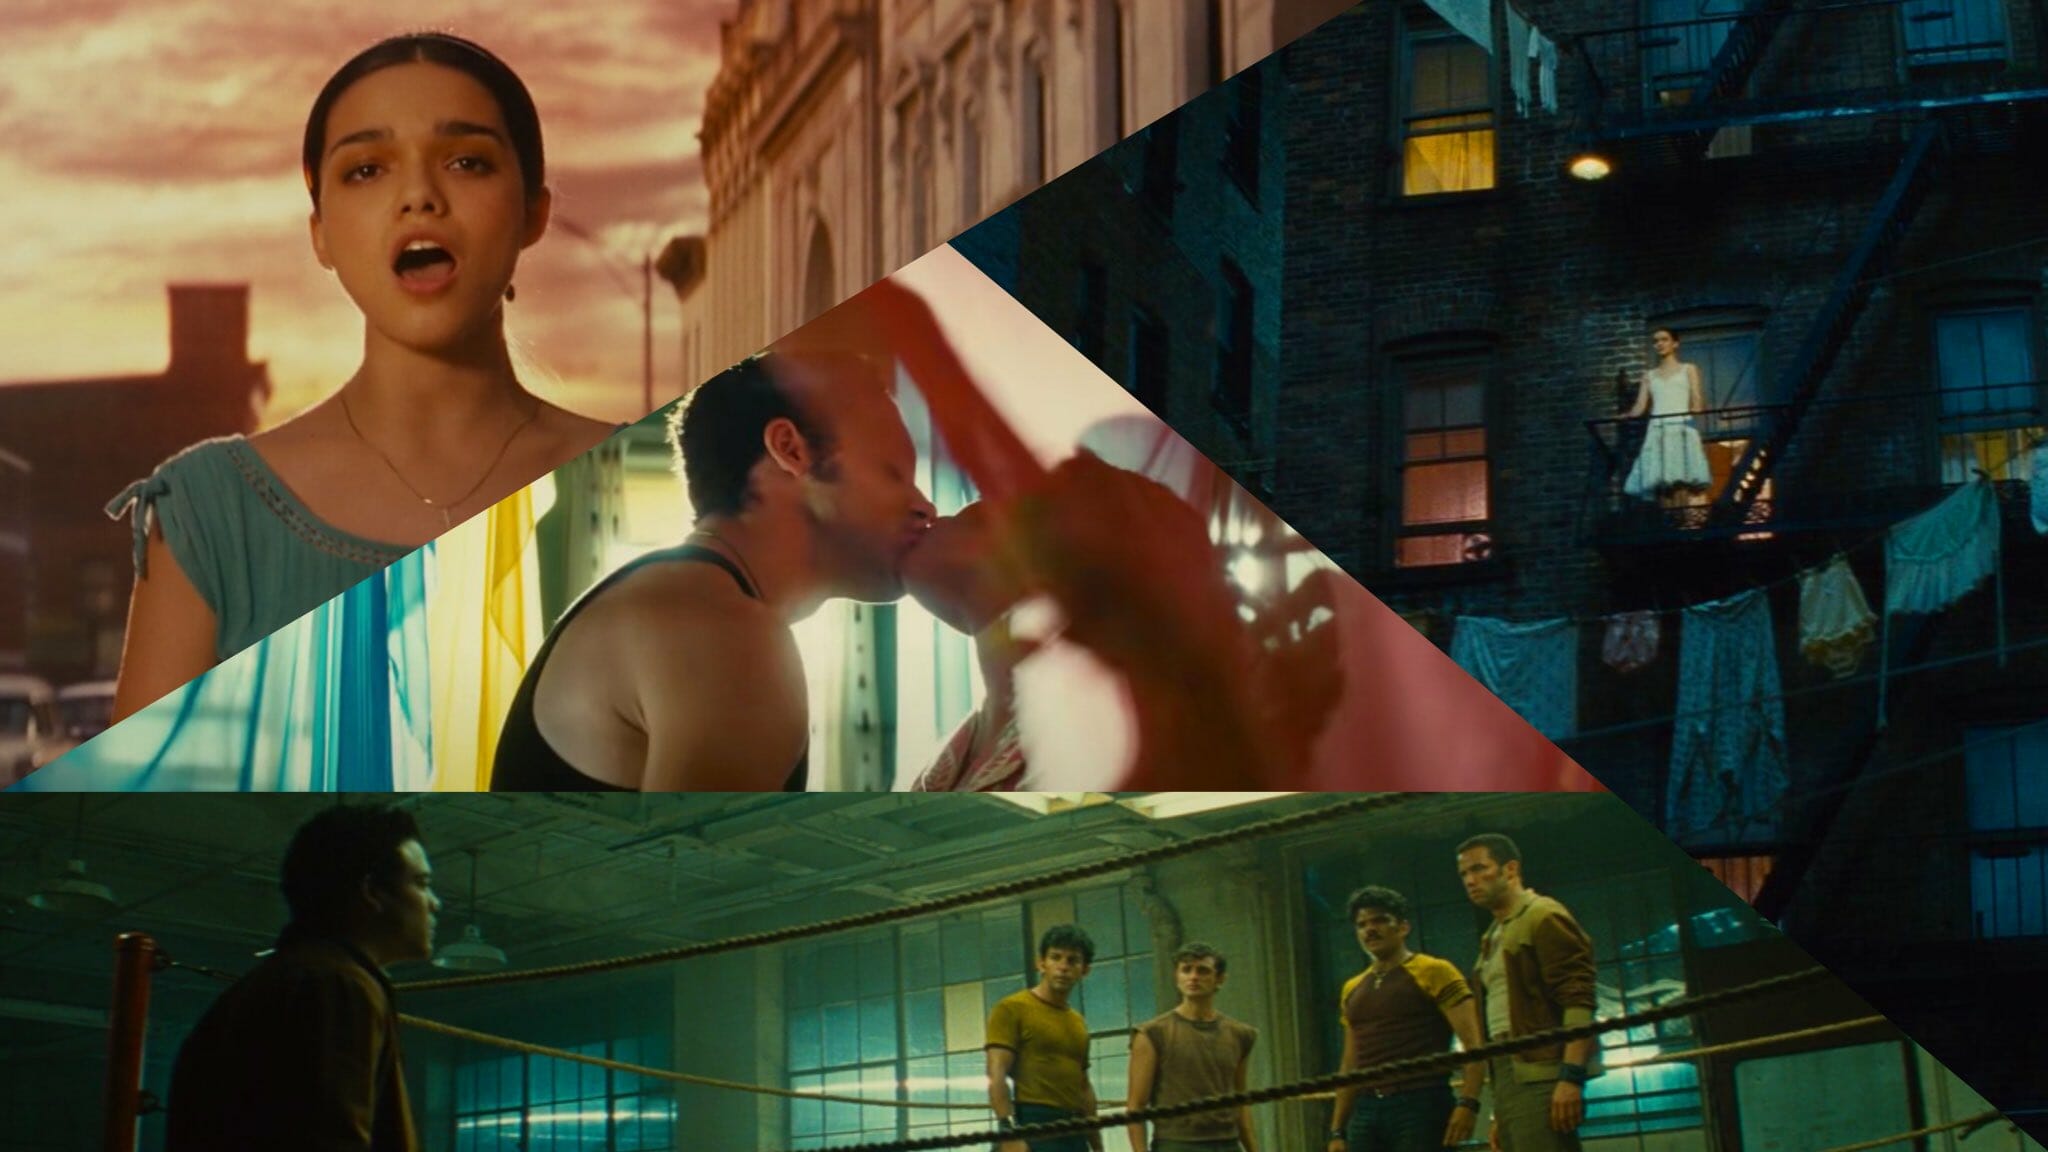 An aperture collage of cinematographer Janusz Kamiński's vibrant colors seen in WEST SIDE STORY, including the now iconic shots of Maria on the balcony and Bernardo and Anita kissing around colorful fabrics in the sunlight.  